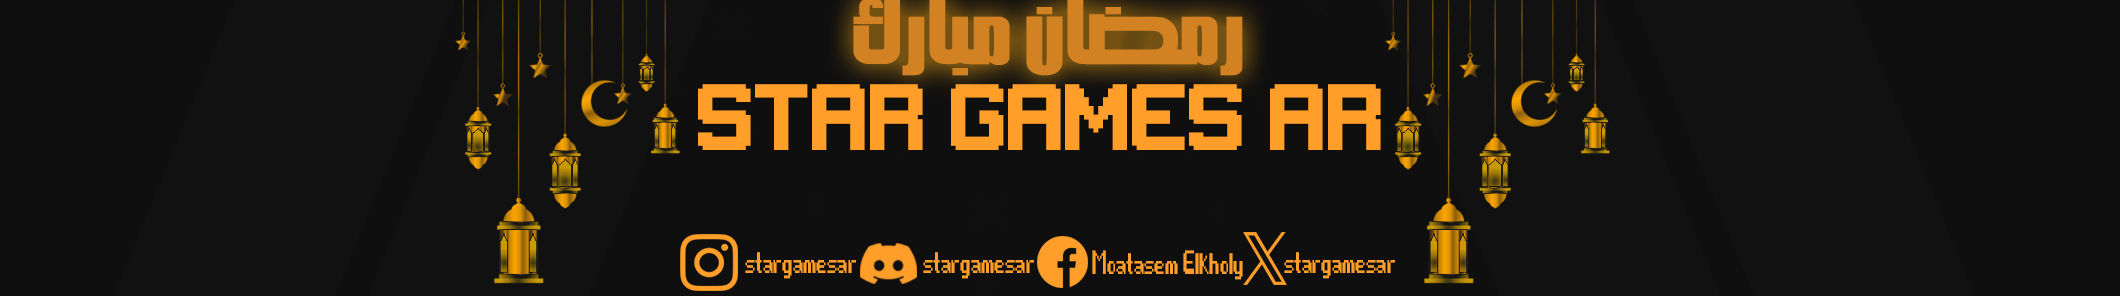 Star Games AR's profile banner